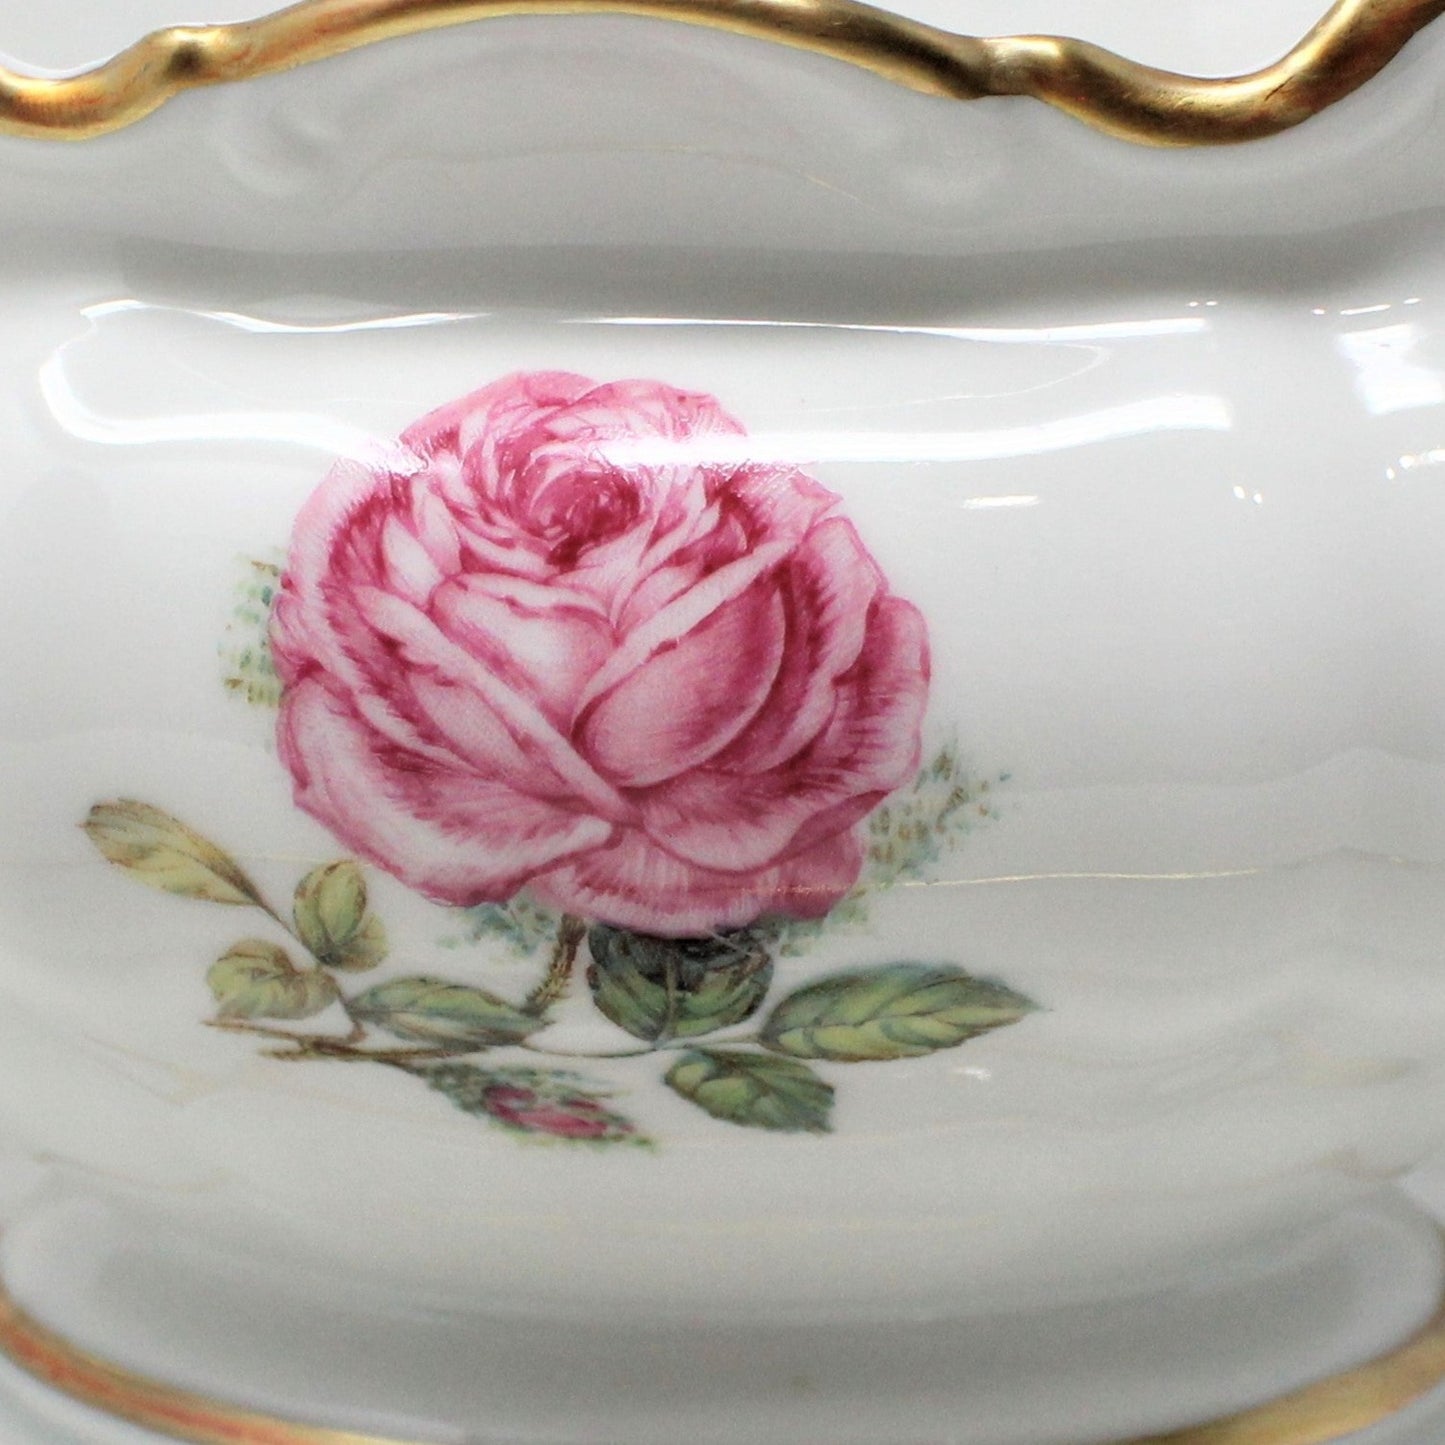 Gravy Boat / Saucière with Underplate, Hutschenreuther, The Dundee, Pink Rose, Bavaria, Germany, Vintage